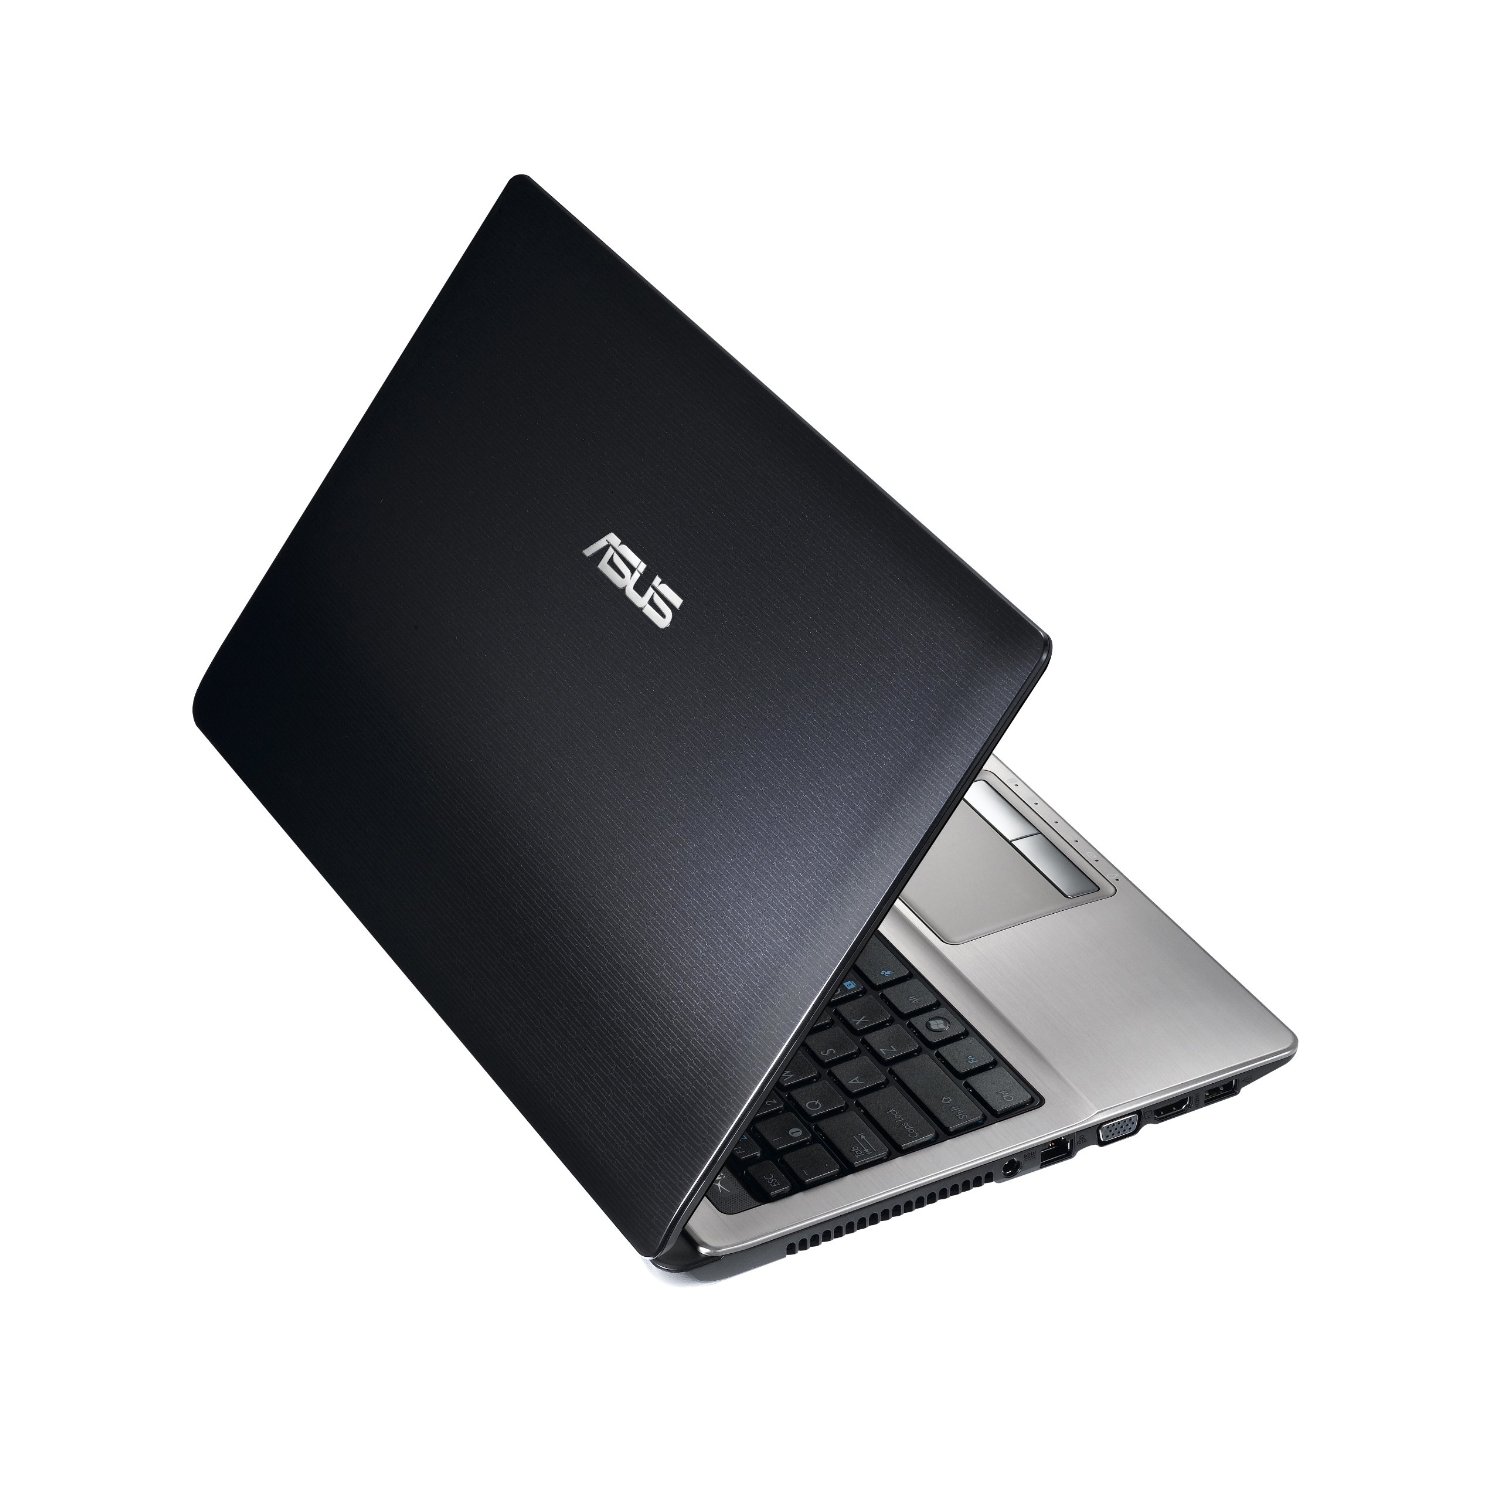 http://thetechjournal.com/wp-content/uploads/images/1204/1335535237-asus-brings-new-a53ees31-156inch-laptop-7.jpg